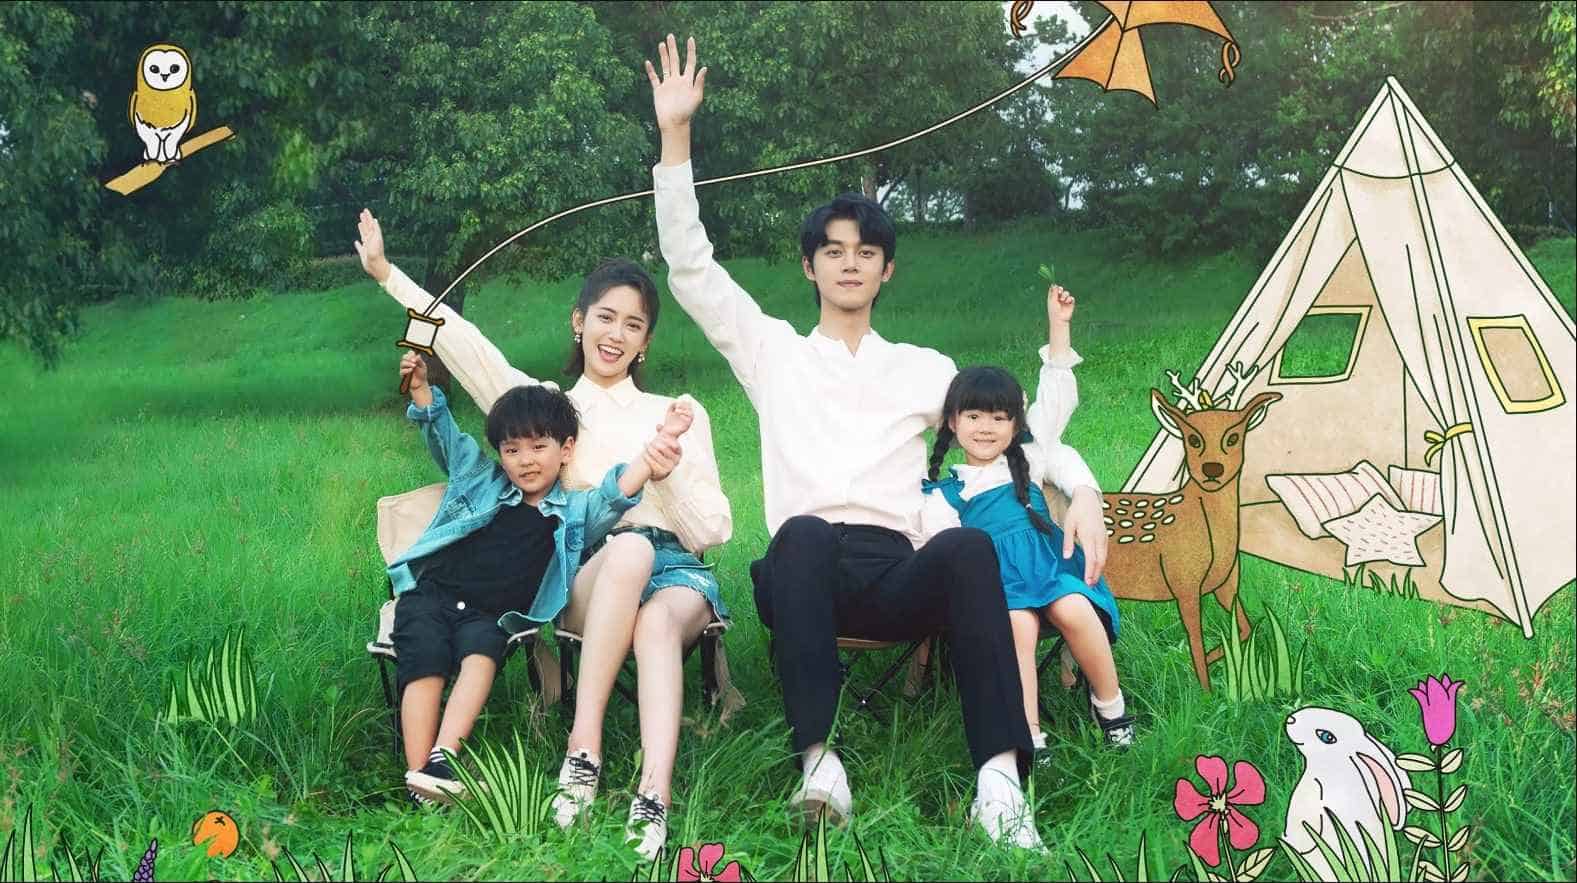 Please Be My Family Episodes 25 & 26: Release Date, Preview & Streaming Guide